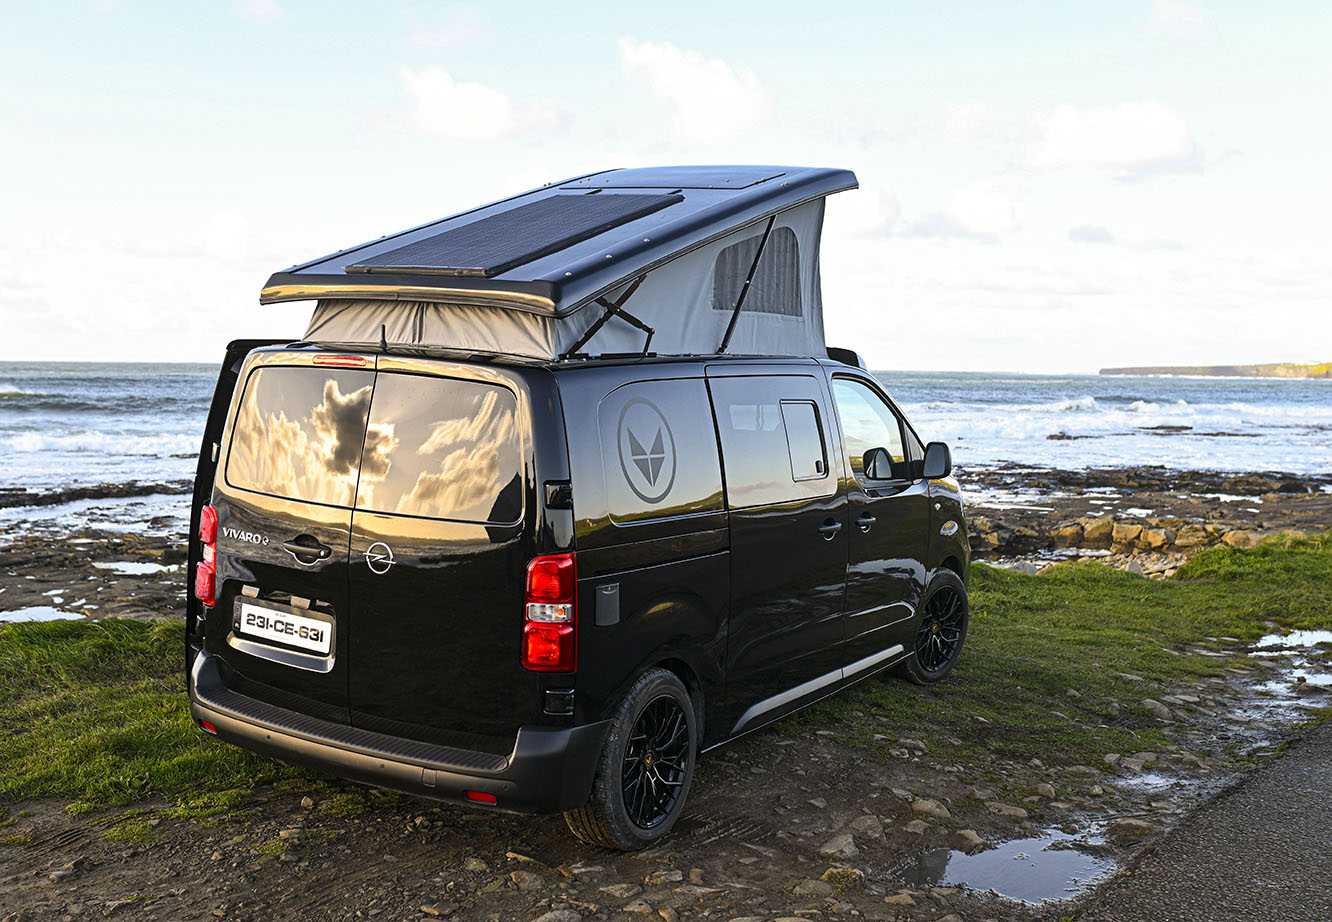 Vanderlust Vivaro e Camper compact while providing comfort and capacity in style